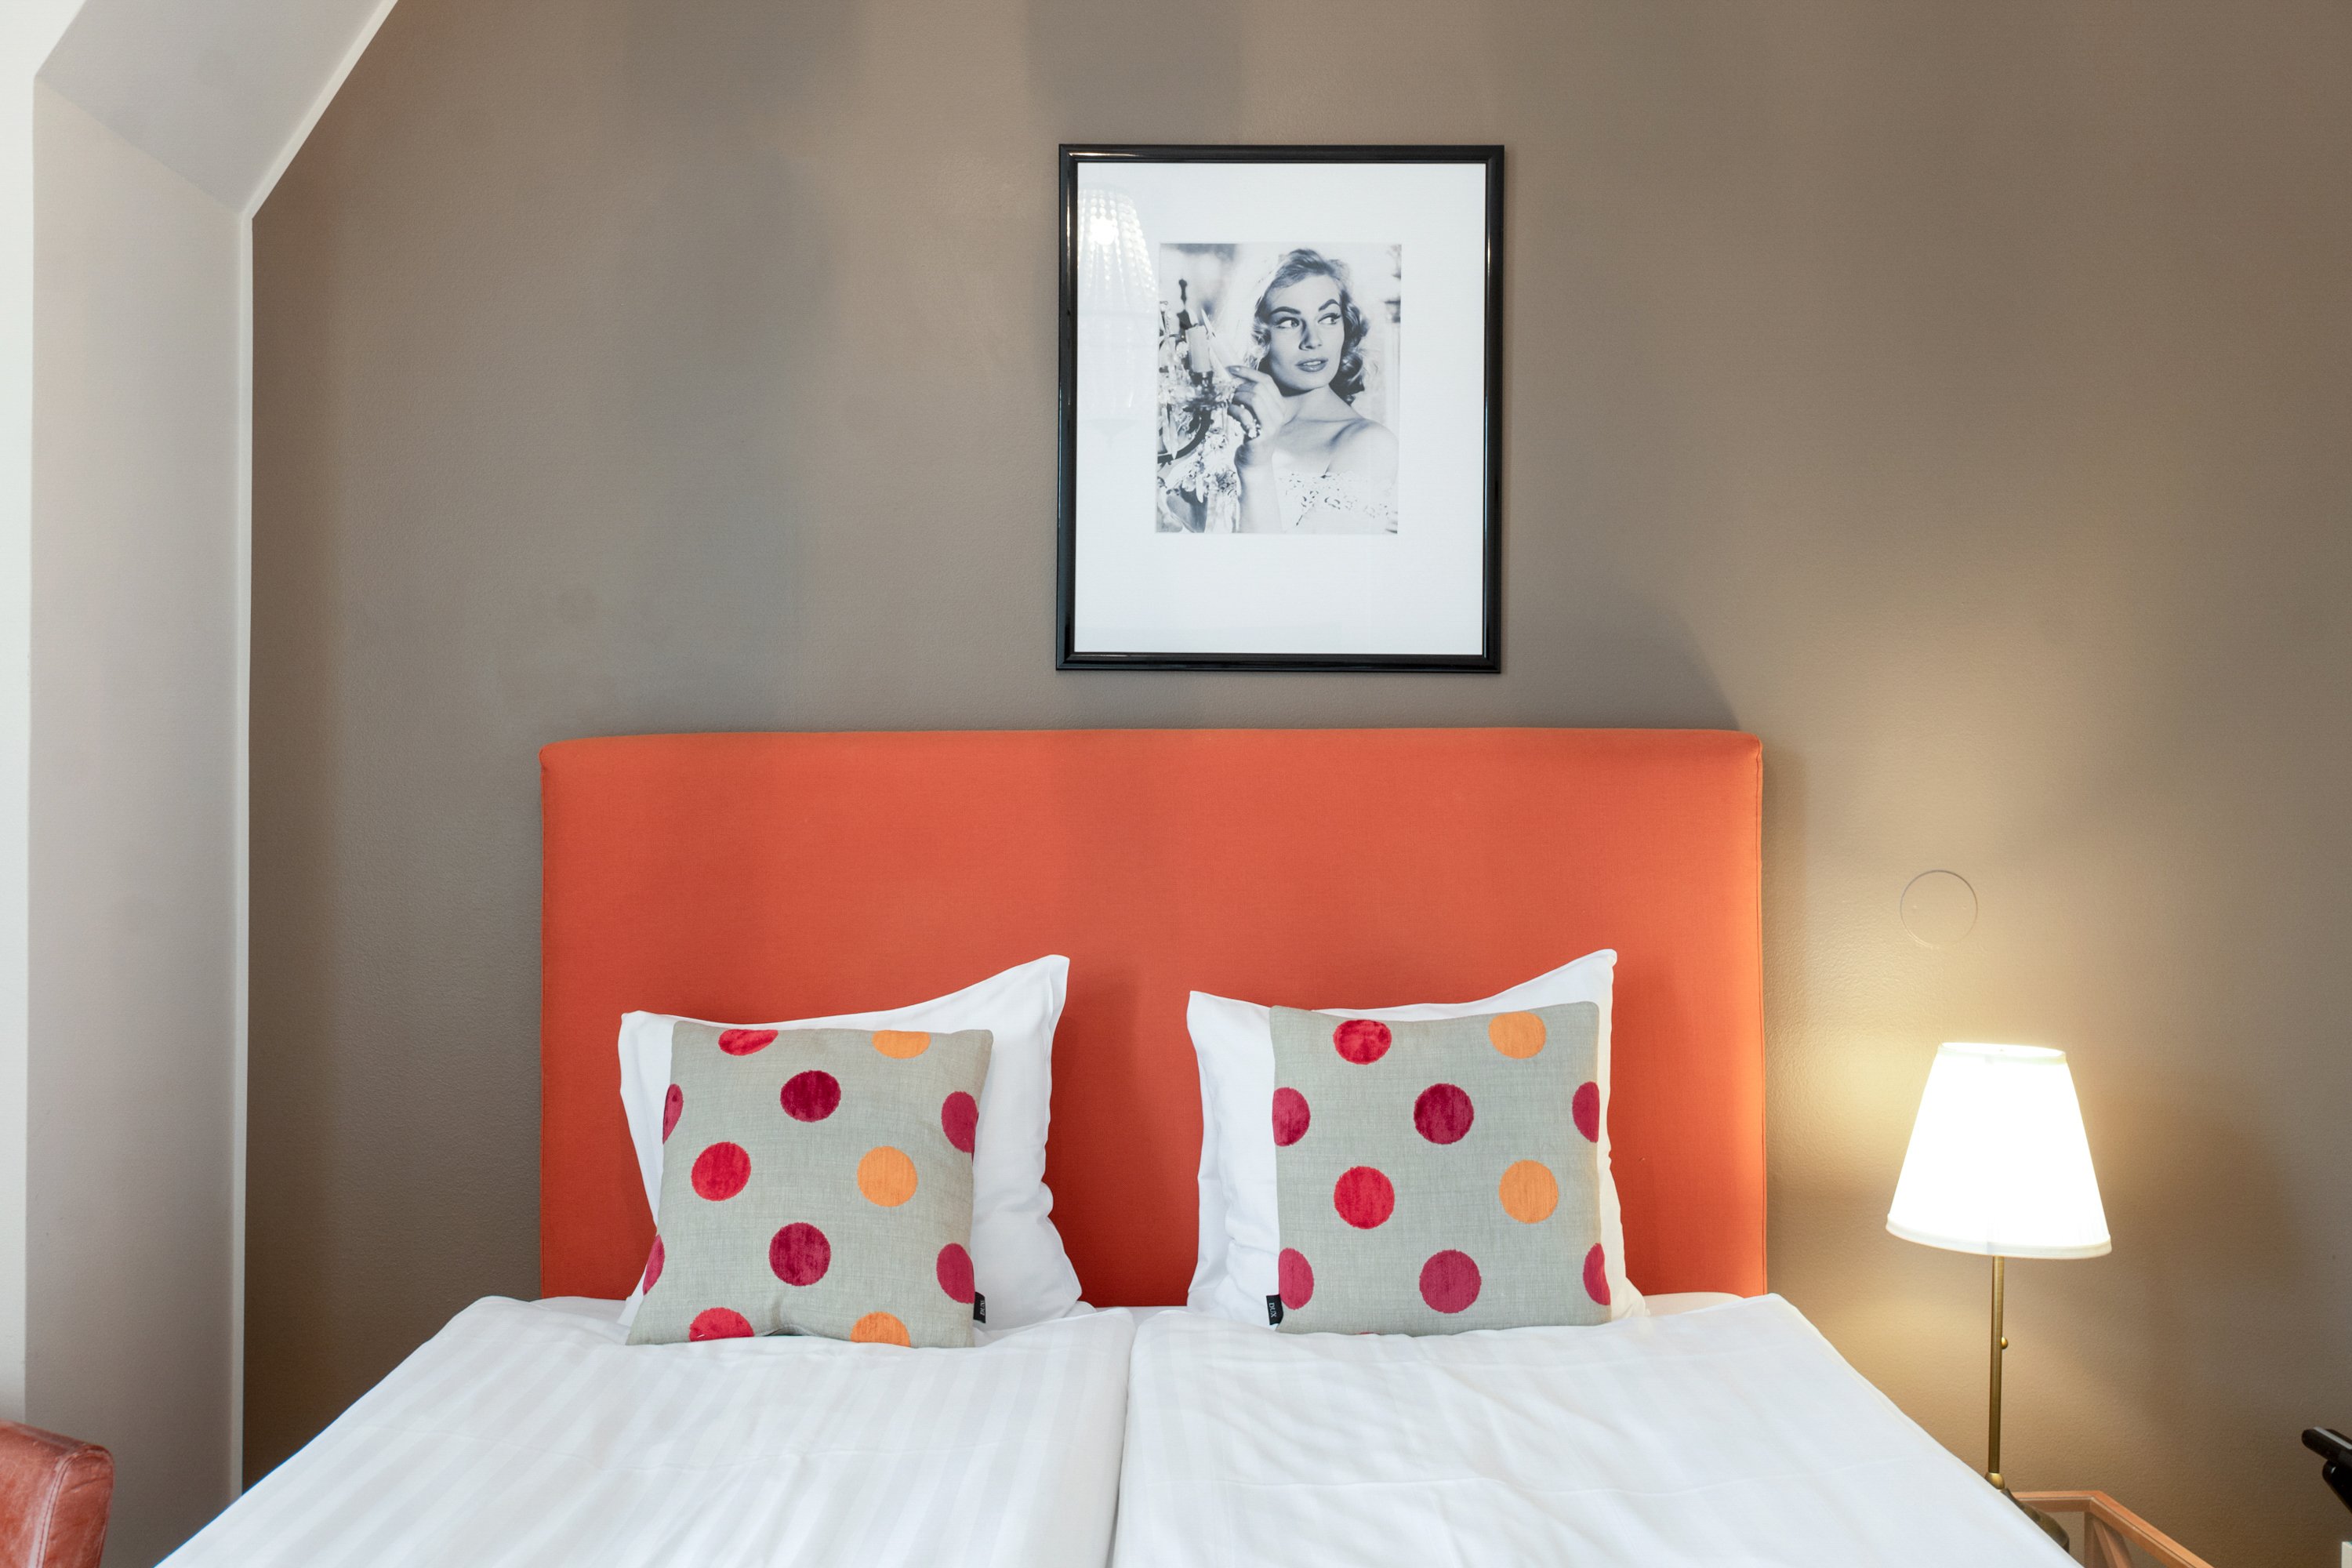 Hotel room with bed, orange headboard and polka dot pillows